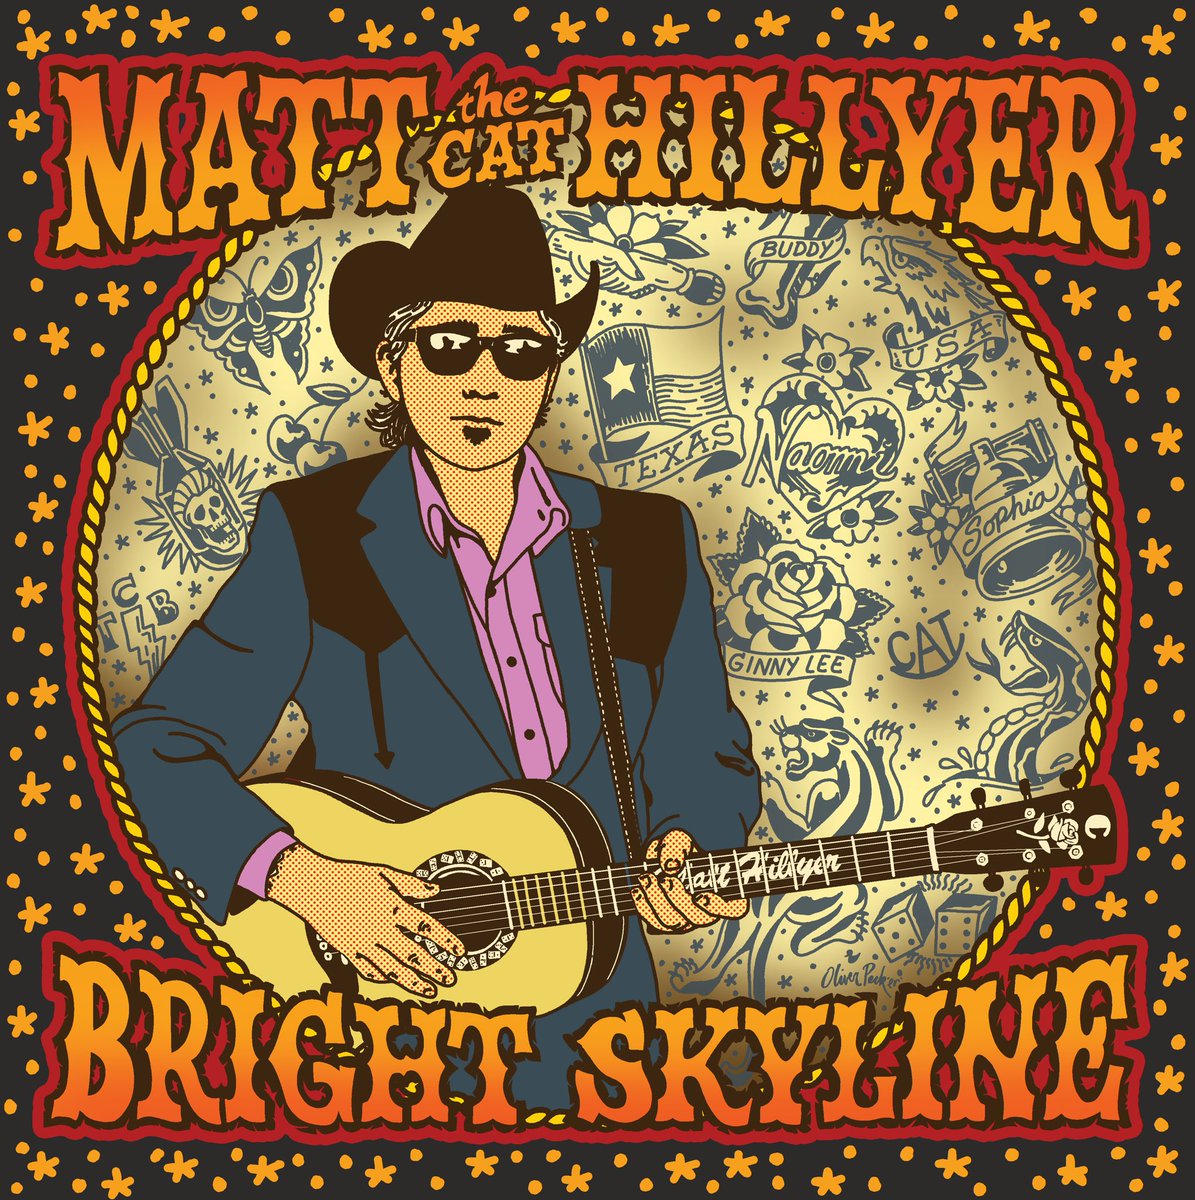 NEW ALBUM ANNOUNCEMENT! My new album “Bright Skyline” on @StateFairRecord comes out on June 21st! Album art by @OLIVER_PECKer Pre-order your copy here! statefairrecords.myshopify.com/search?q=Brigh…